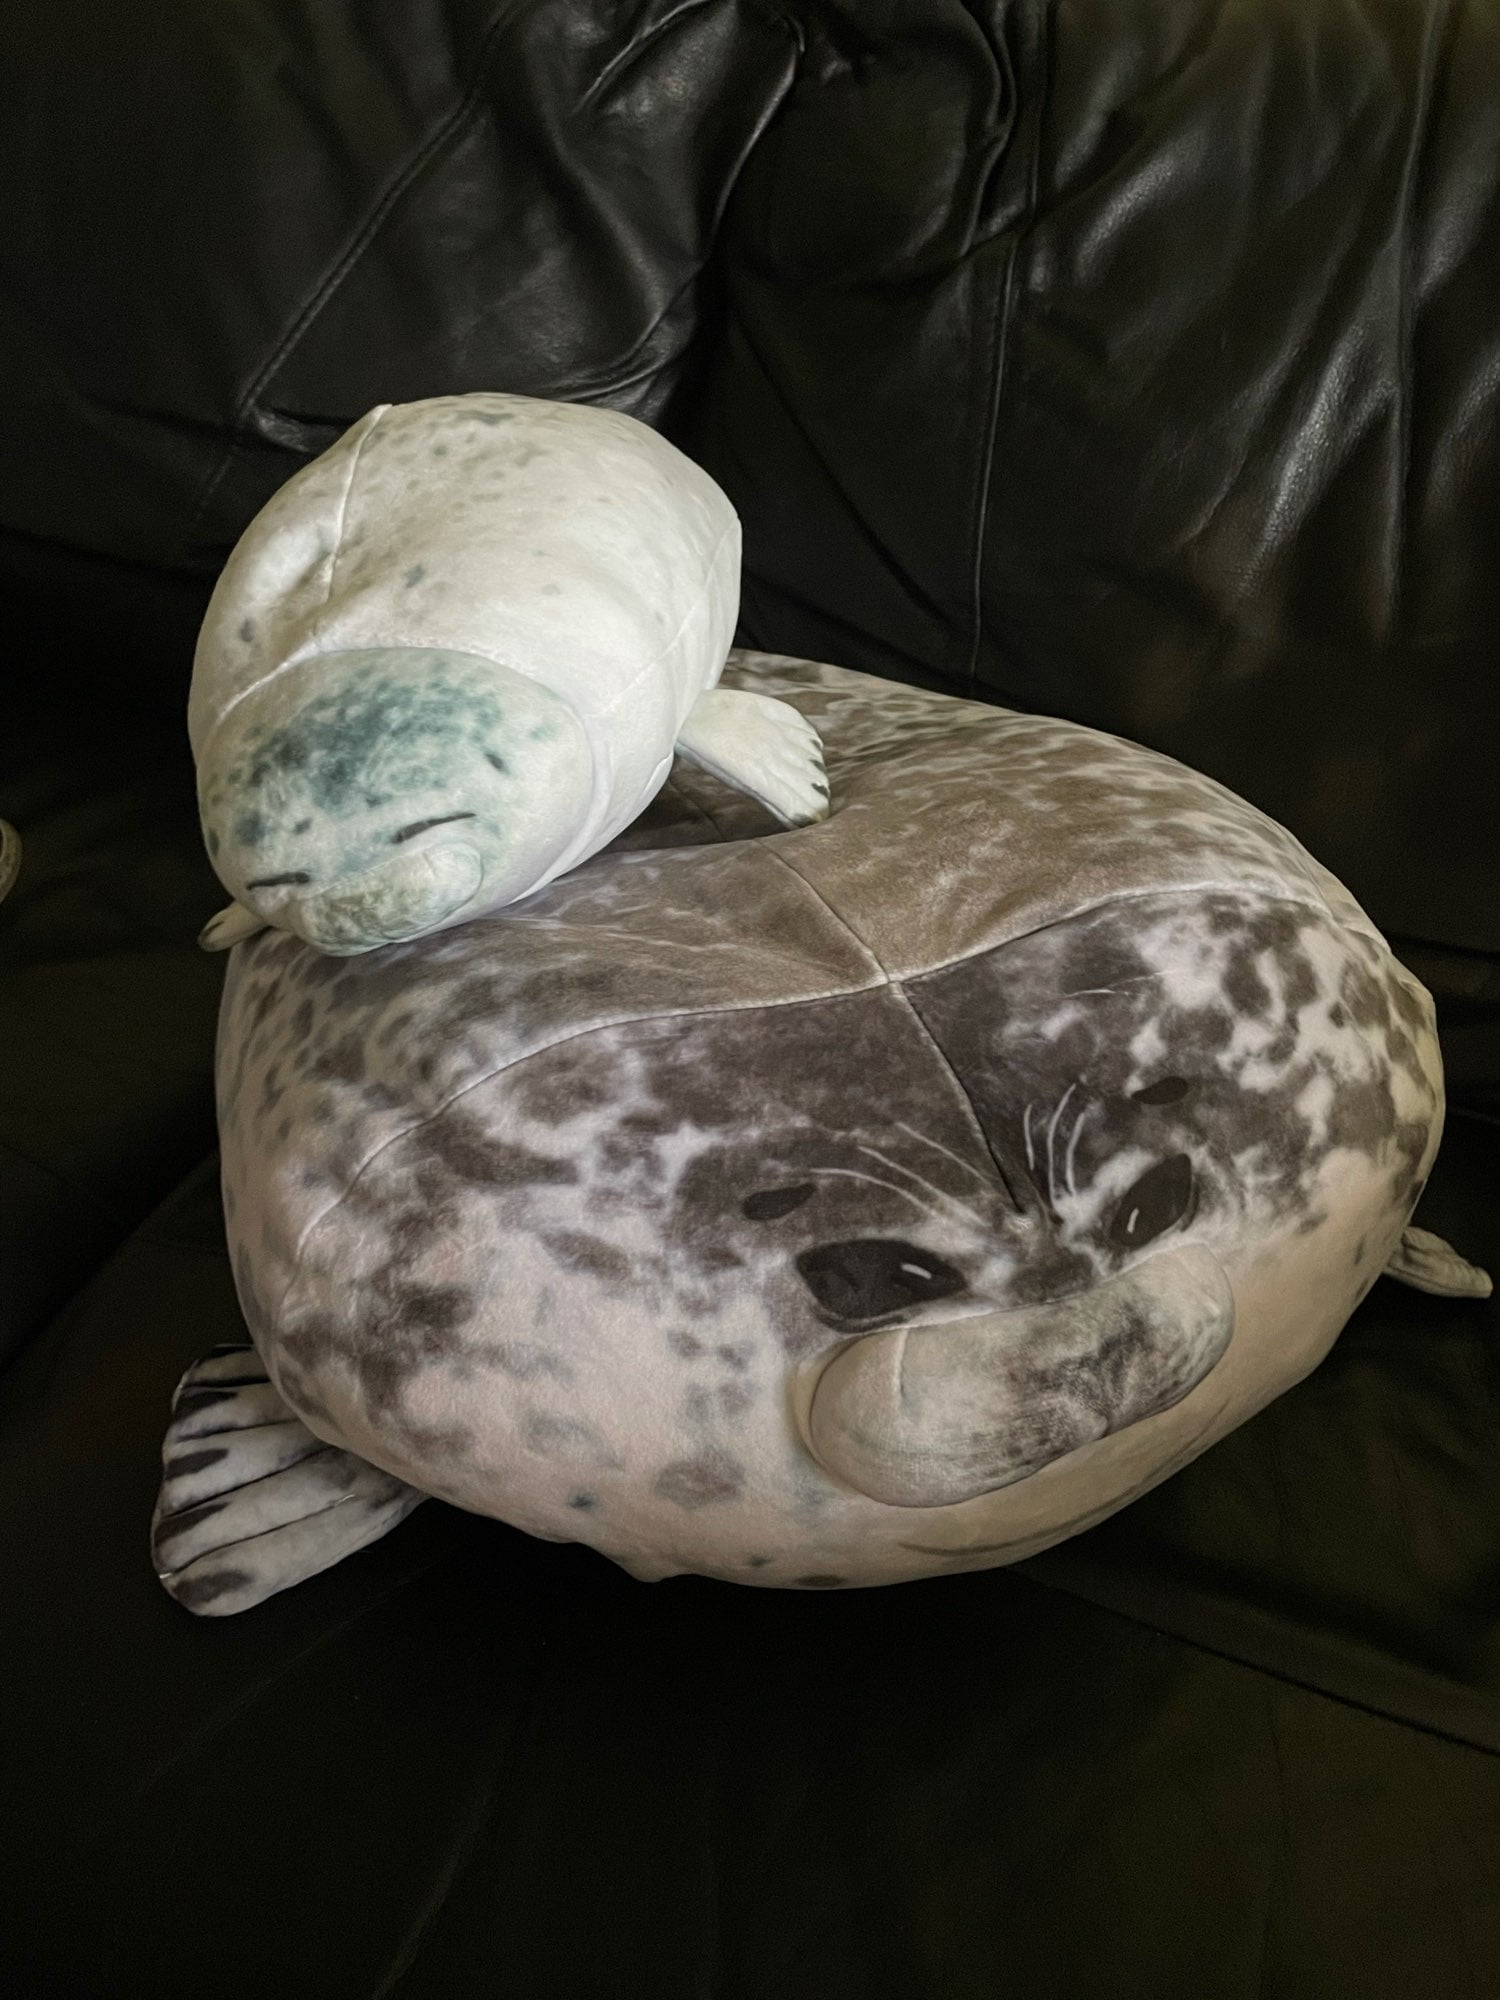 Giant 3D Blob Seal Pillow Soft Hugging Stuffed Cotton Plush Animal Toy photo review